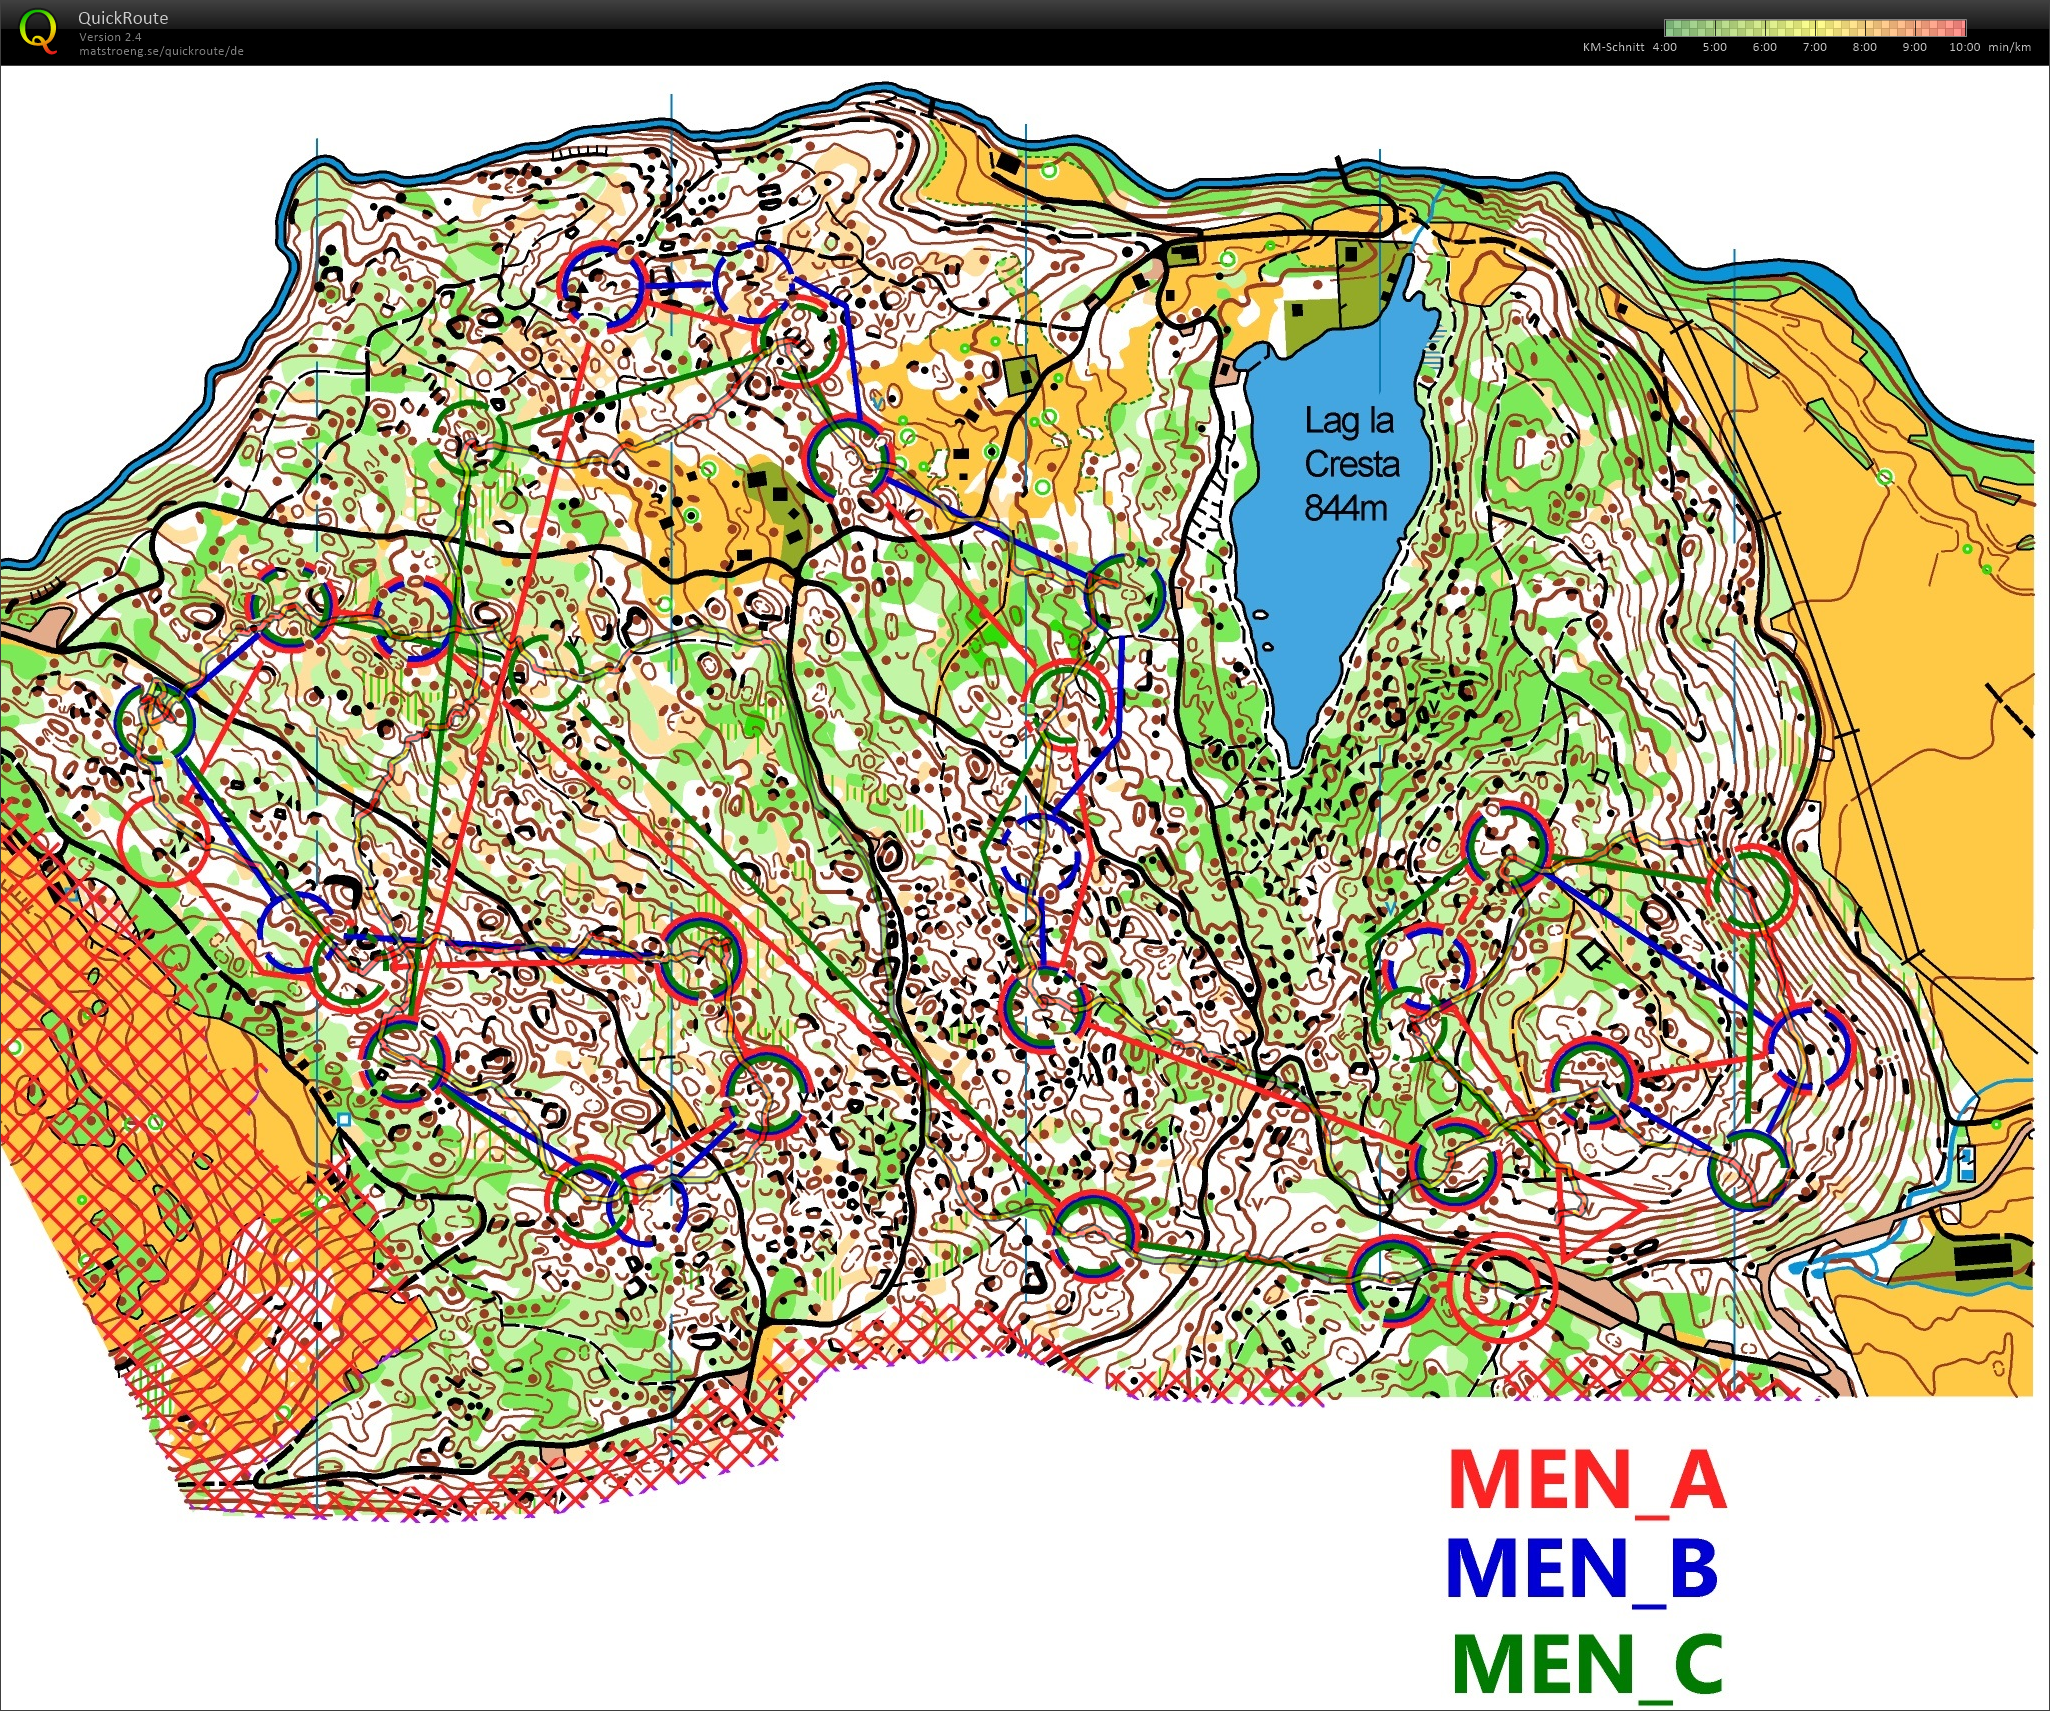 WOC TL Middle Testrace (06/10/2022)